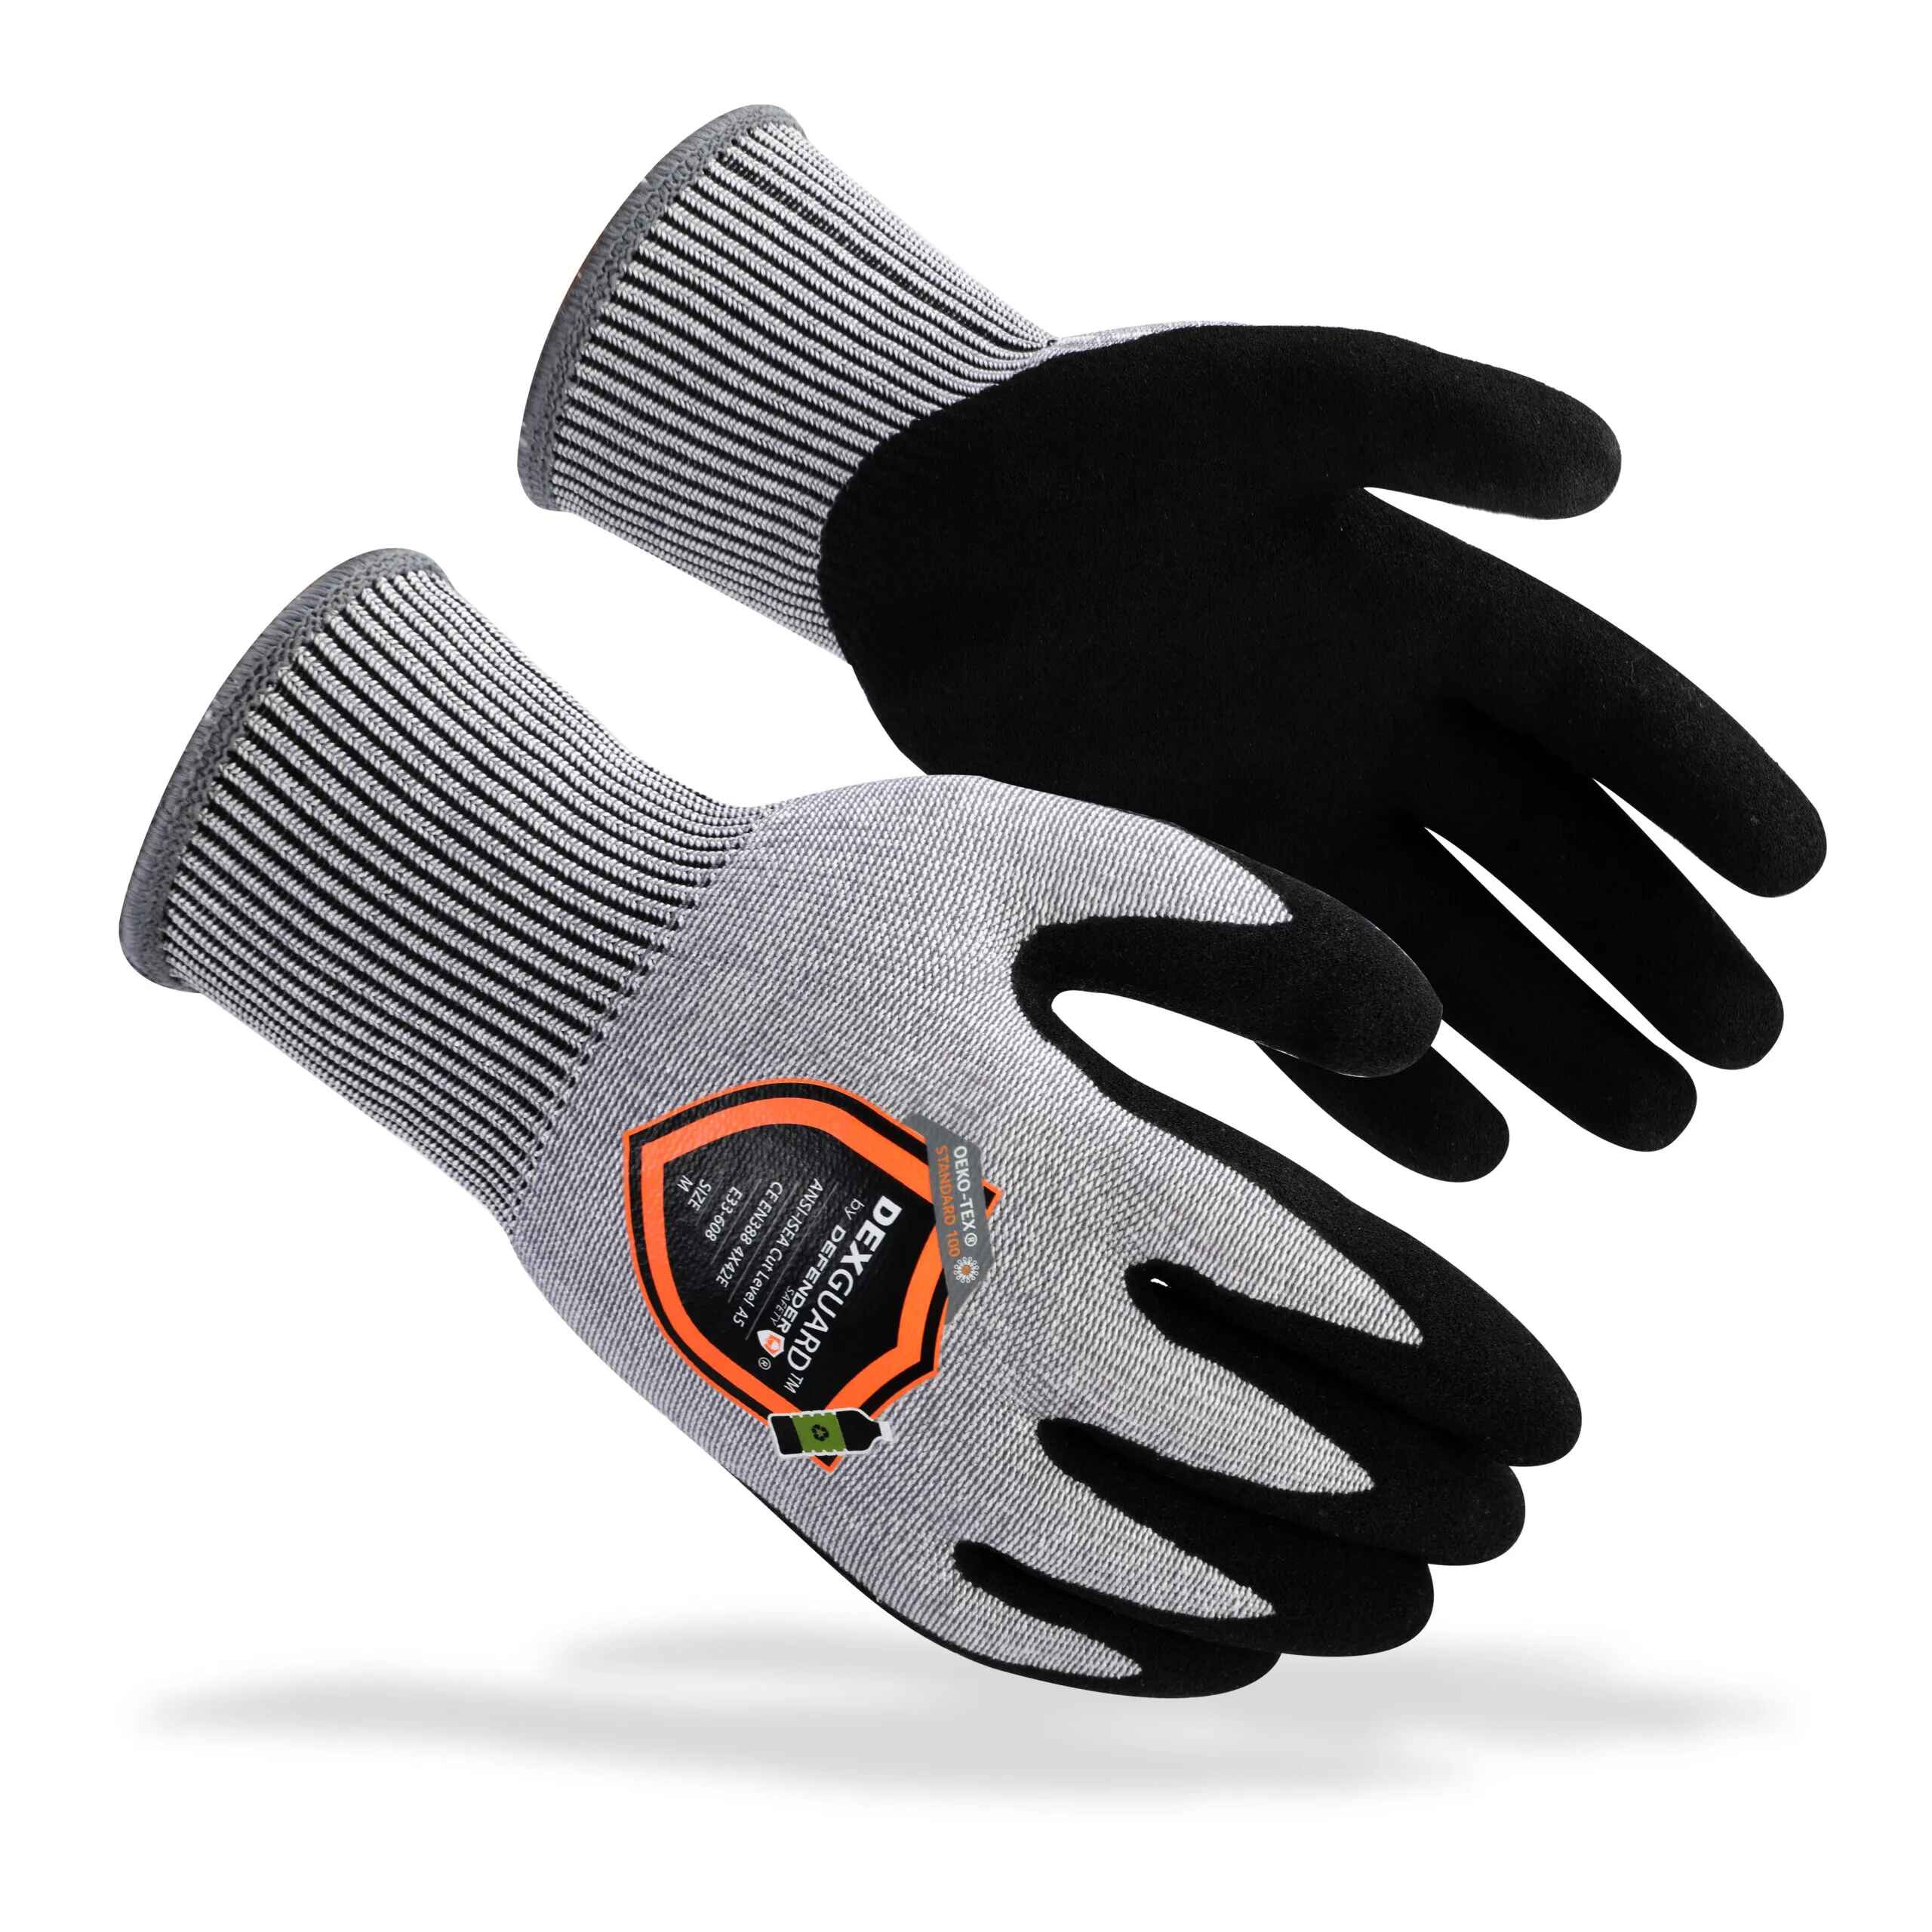 DEXGUARD™ A5 Cut Gloves, Cold Weather 13G Thermal Liner, Water Resistant,  Level 4 Abrasion Resistant, Latex Coated